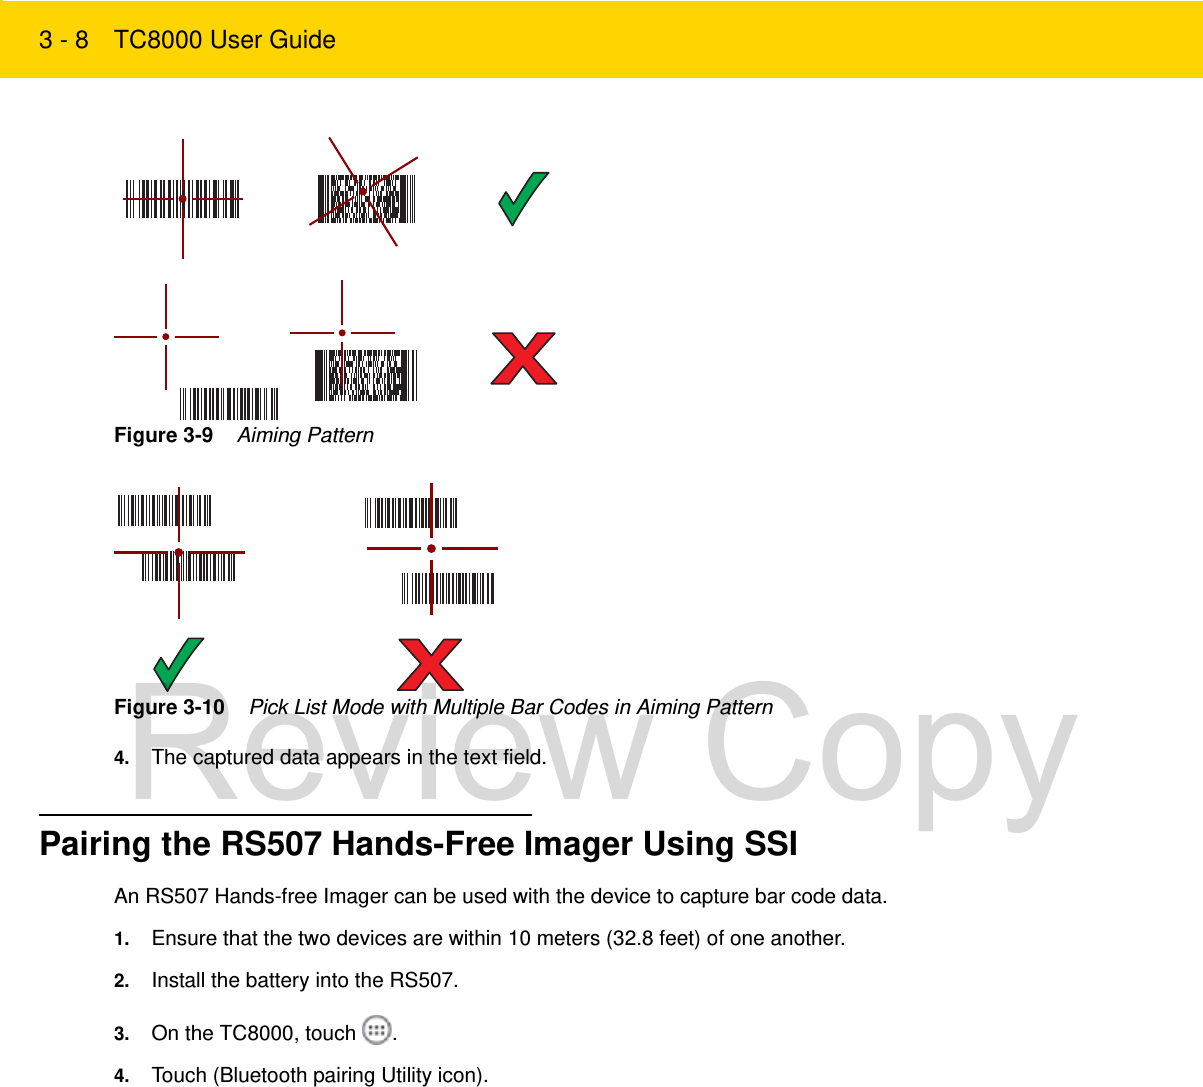 3 - 8 TC8000 User GuideFigure 3-9    Aiming PatternFigure 3-10    Pick List Mode with Multiple Bar Codes in Aiming Pattern4. The captured data appears in the text field.Pairing the RS507 Hands-Free Imager Using SSIAn RS507 Hands-free Imager can be used with the device to capture bar code data.1. Ensure that the two devices are within 10 meters (32.8 feet) of one another.2. Install the battery into the RS507.3. On the TC8000, touch  .4. Touch (Bluetooth pairing Utility icon).Review Copy